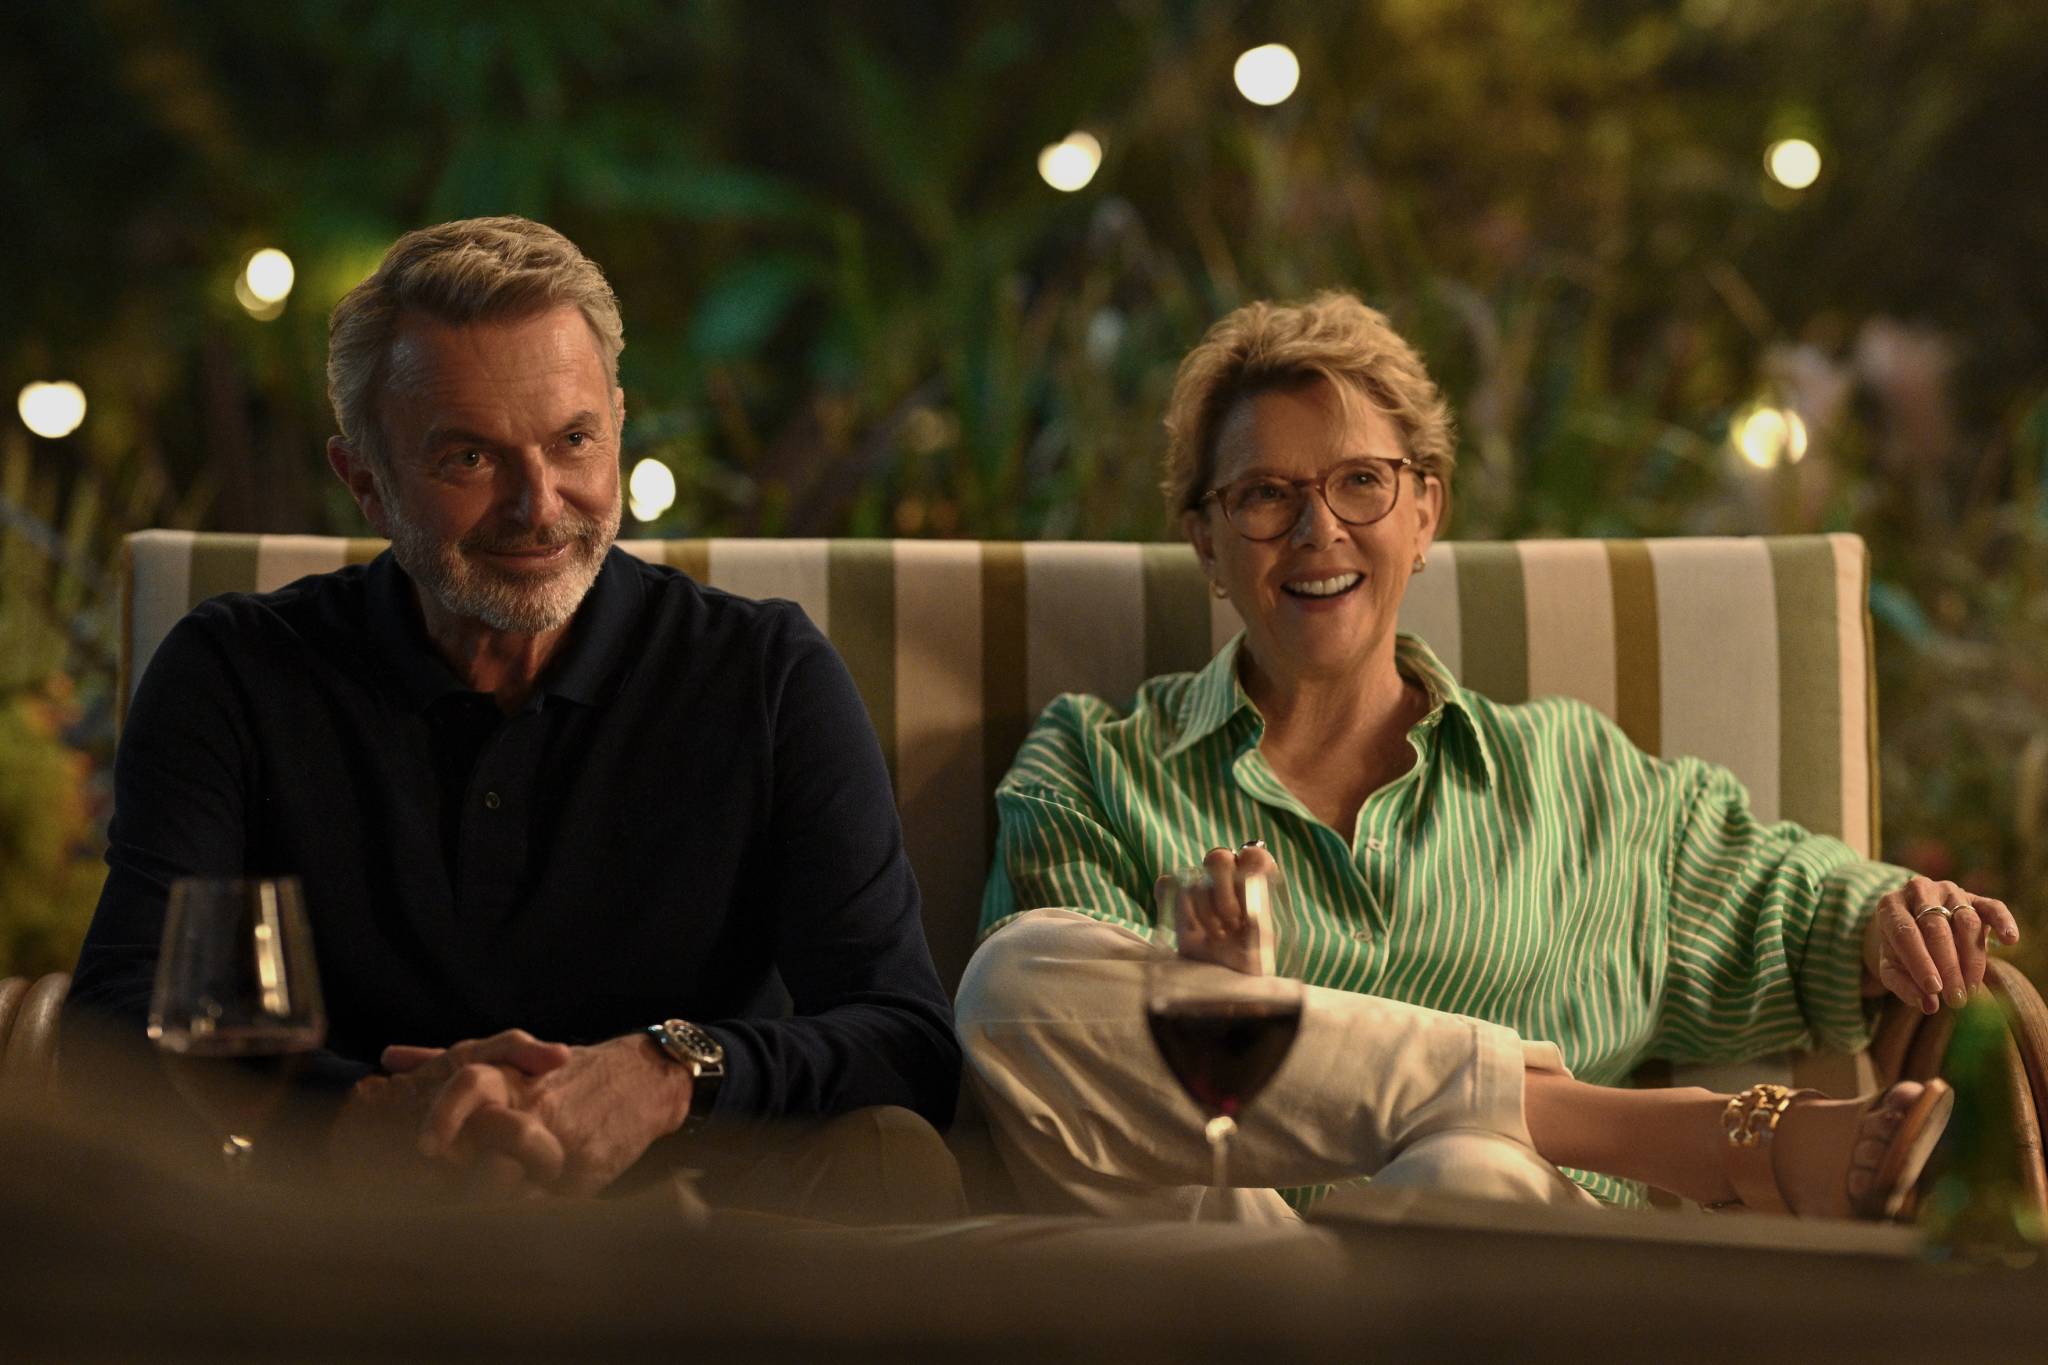 APPLES NEVER FALL -- "Amy" Episode 103 -- Pictured: (l-r) Sam Neill as Stan, Annette Bening as Joy -- (Photo by: Jasin Boland/PEACOCK)